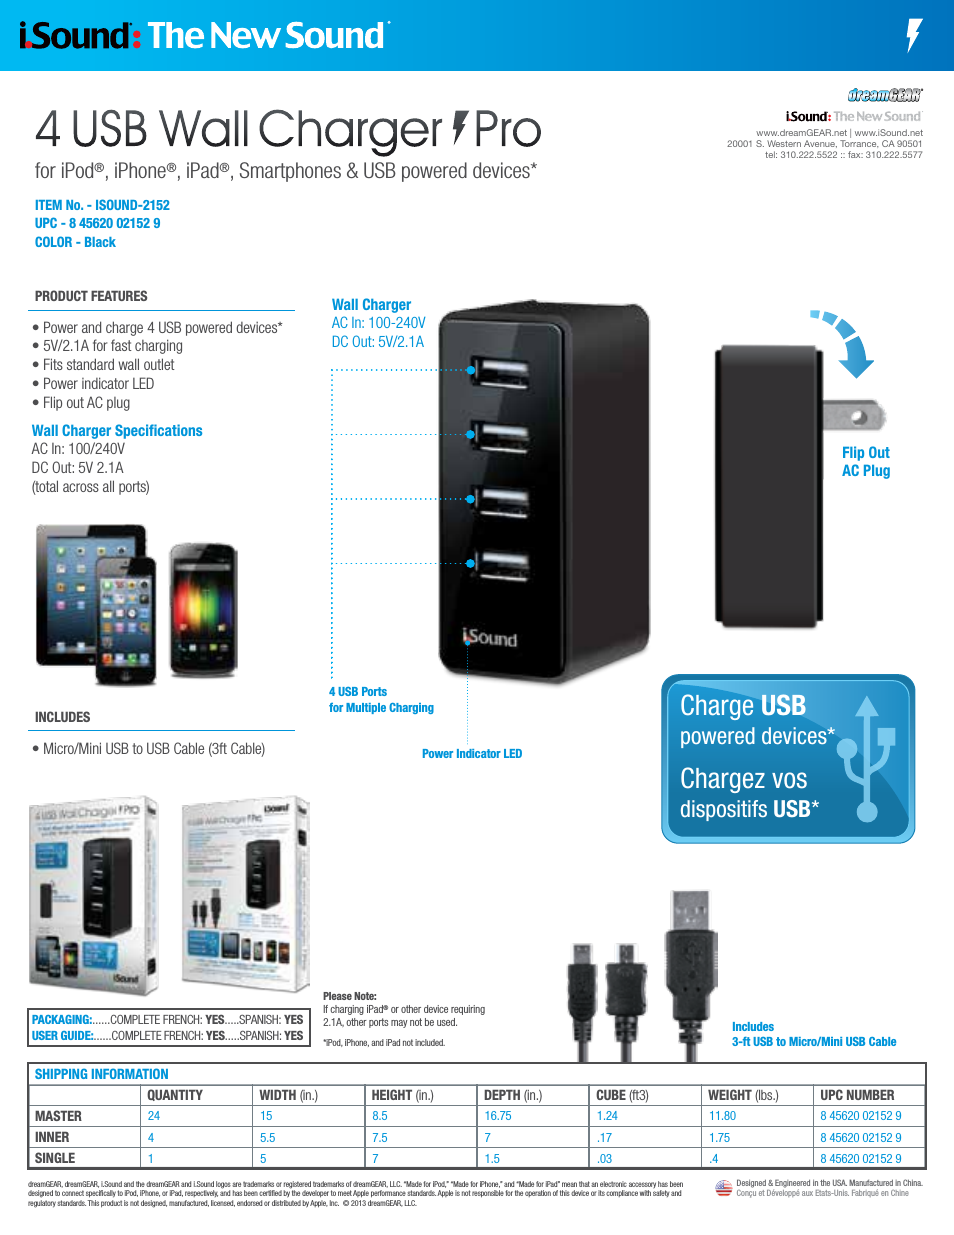 4 USB Wall Charger Pro 2152 - Sell Sheet